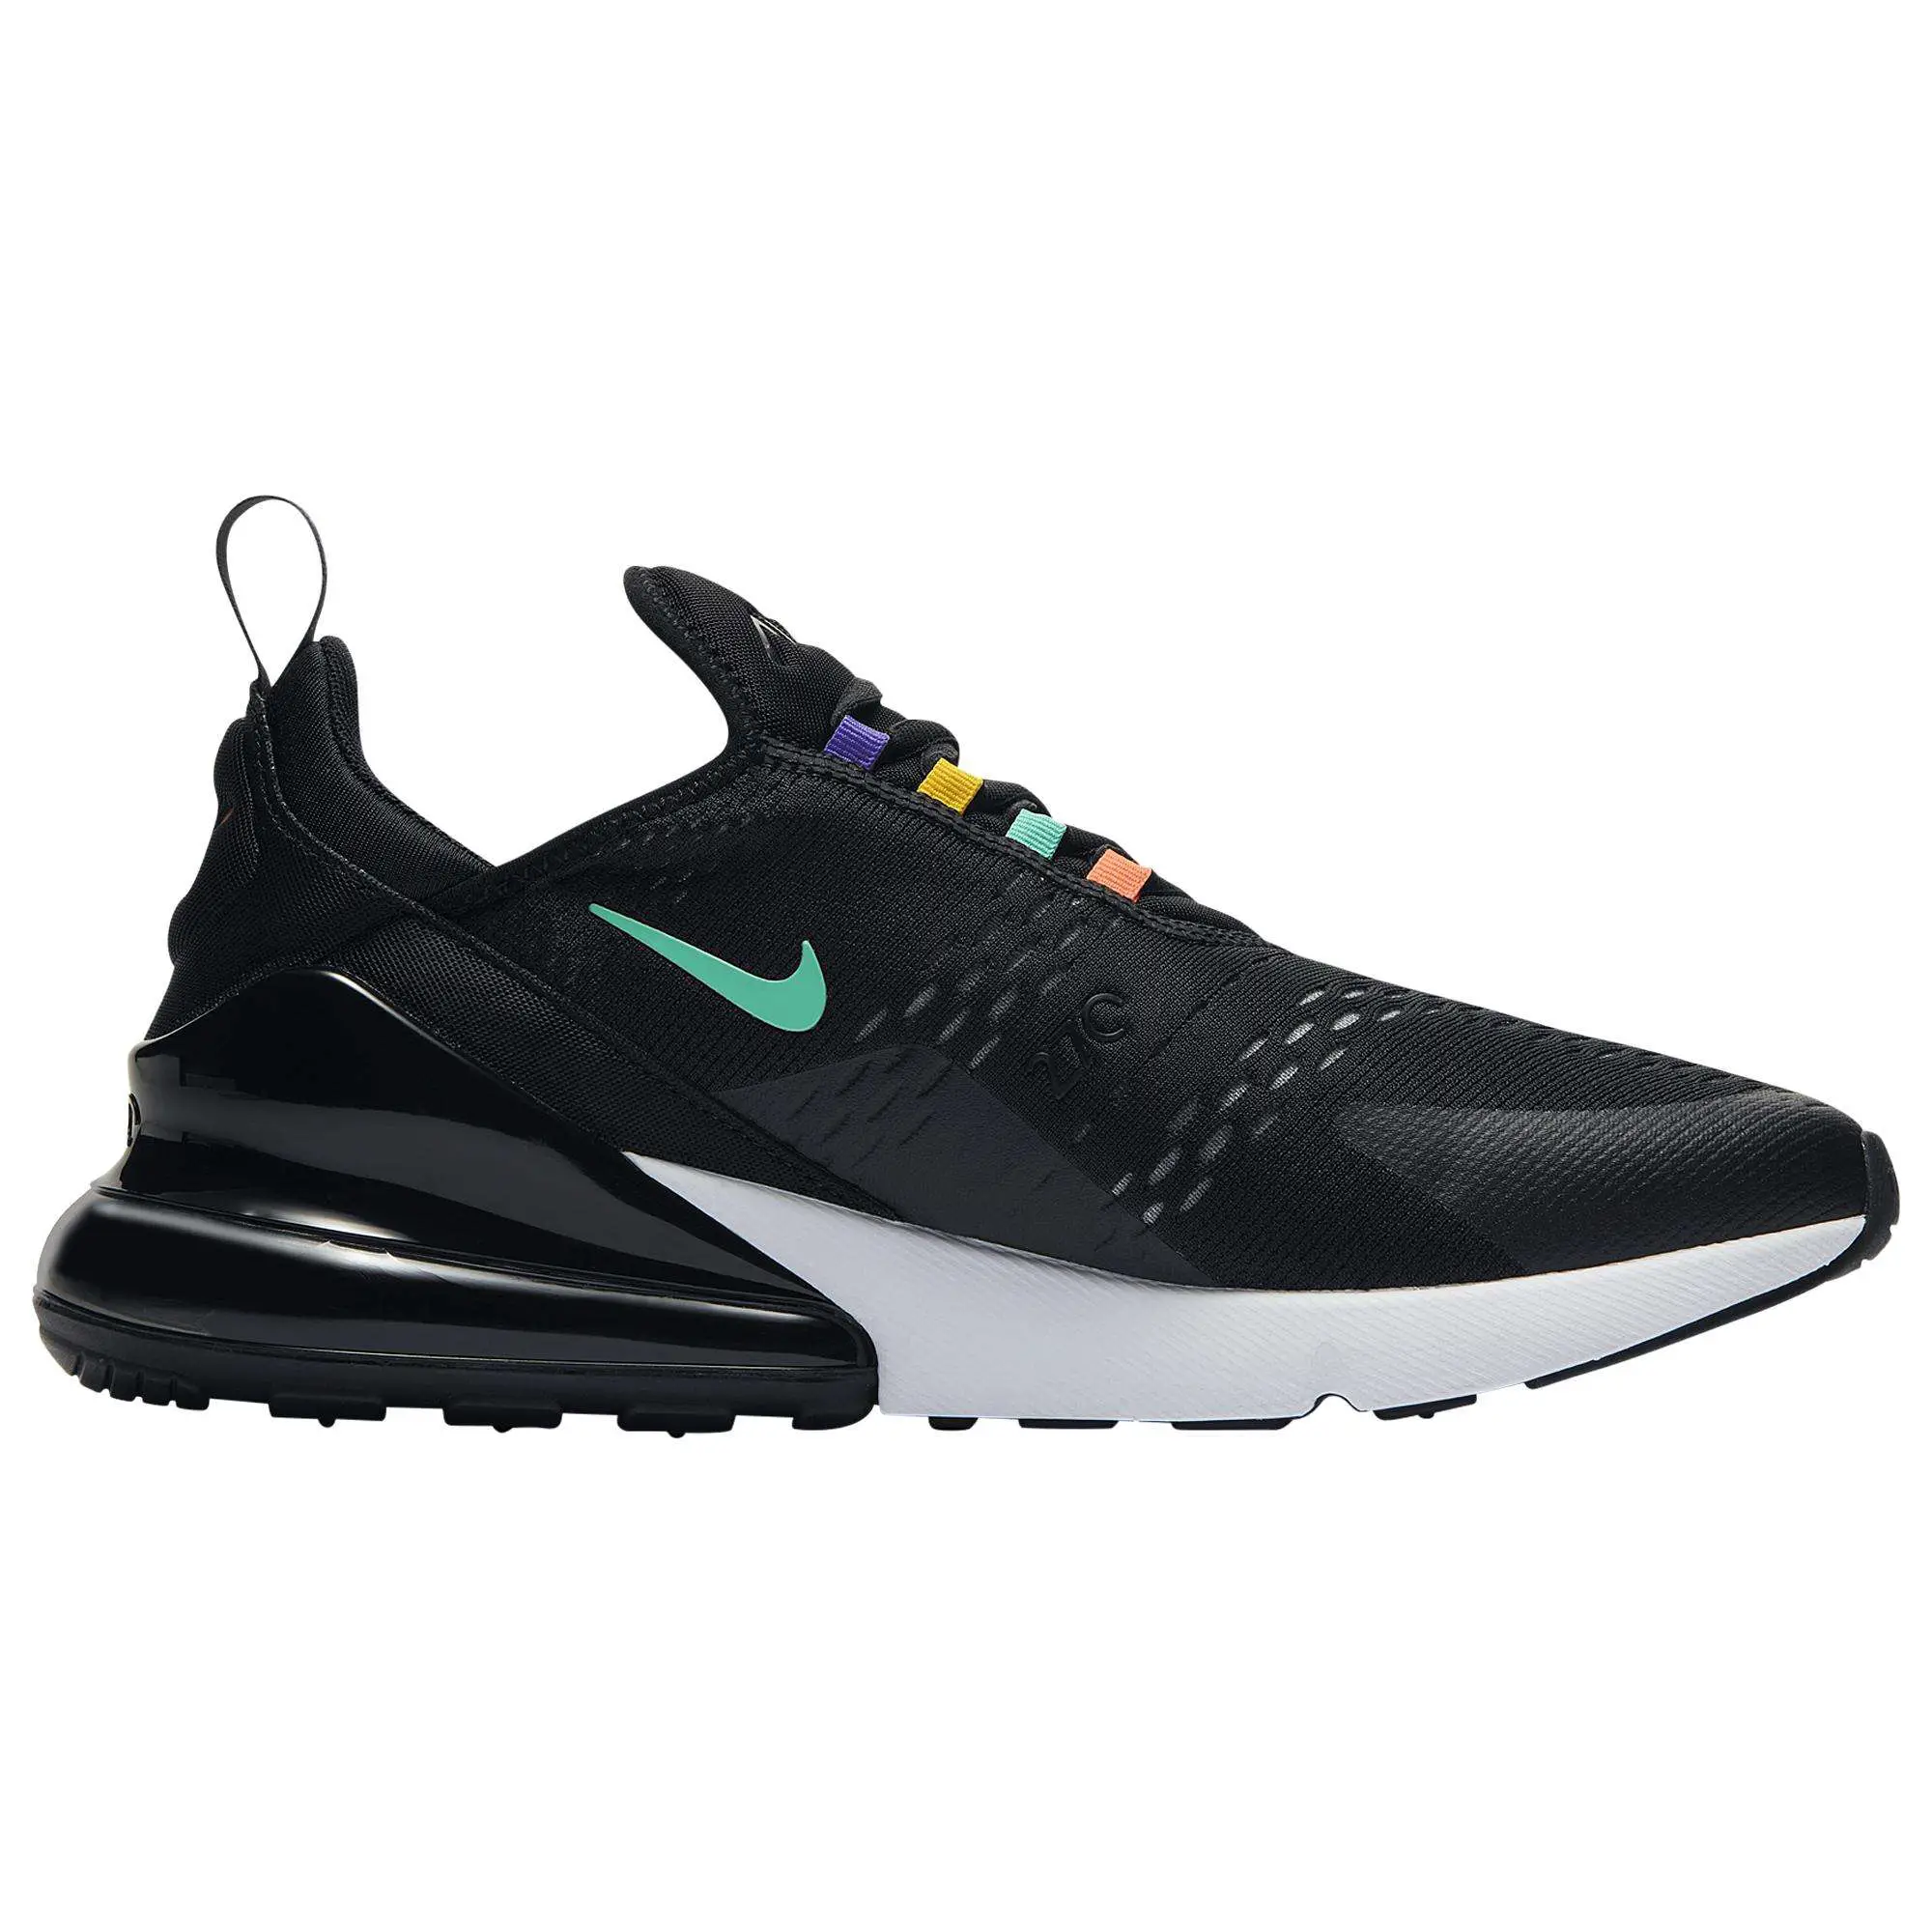 Are Air Max 270 Running Shoes - LoveShoesClub.com